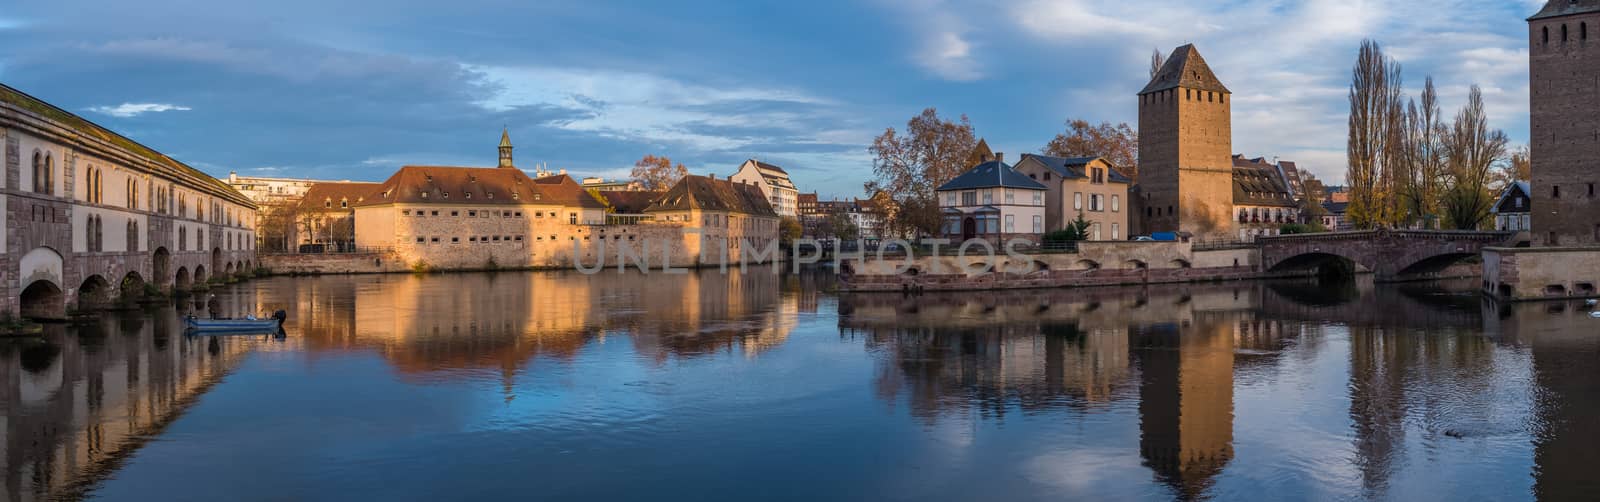 Ponts Couverts from the Barrage Vauban in Strasbourg France by Netfalls